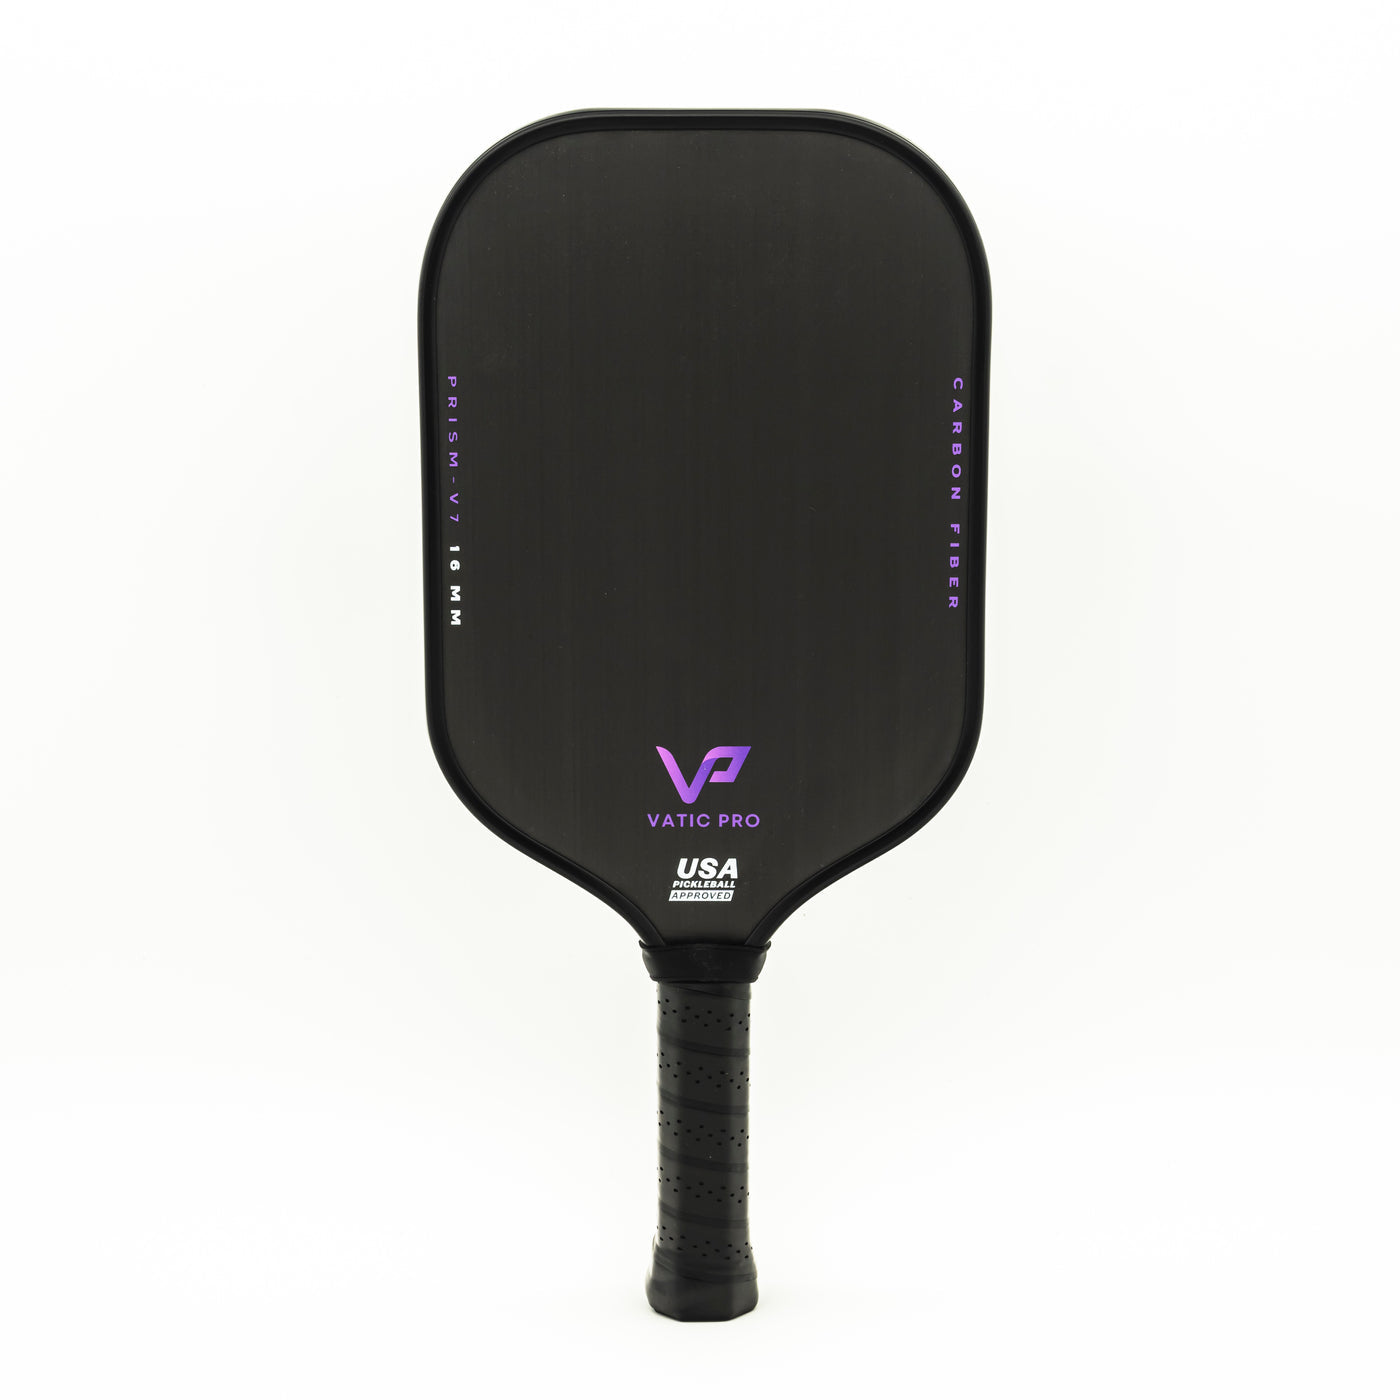 A Vatic Prism V7 16mm paddle on a white background.